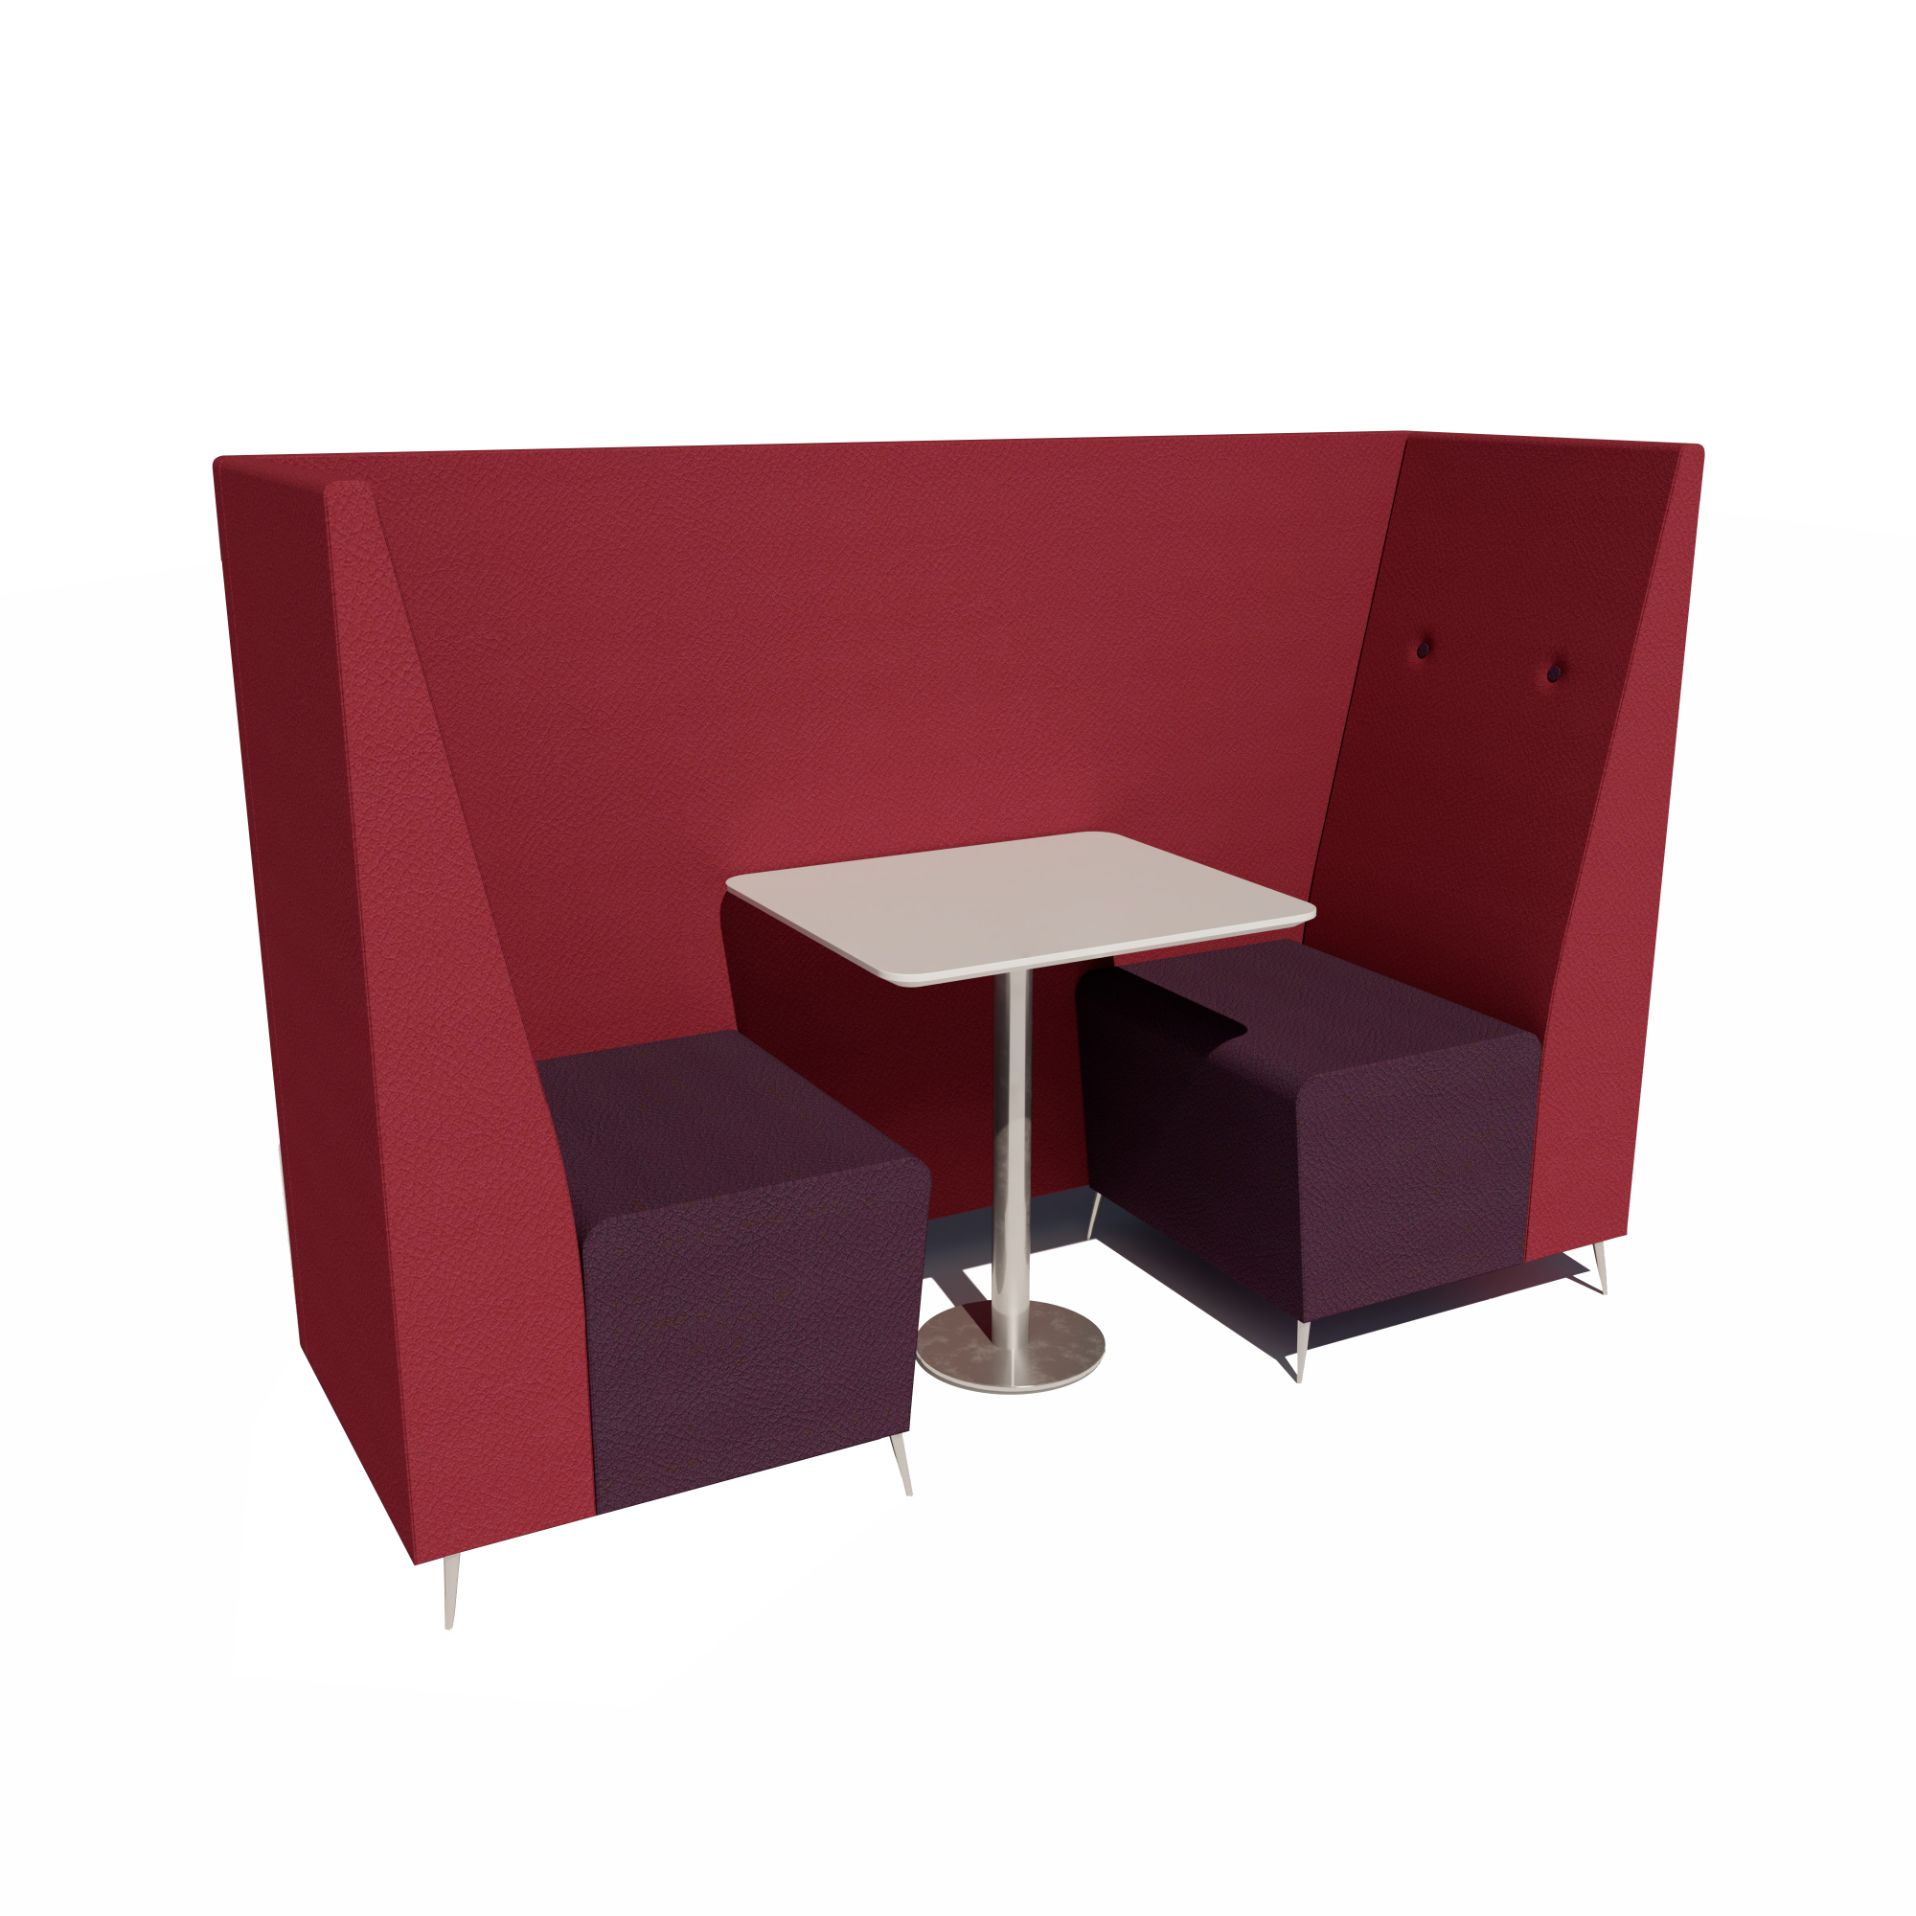 two person banquette seating unit with a link panel and an EDT 2, MFC finish table and a stainless steel column leg